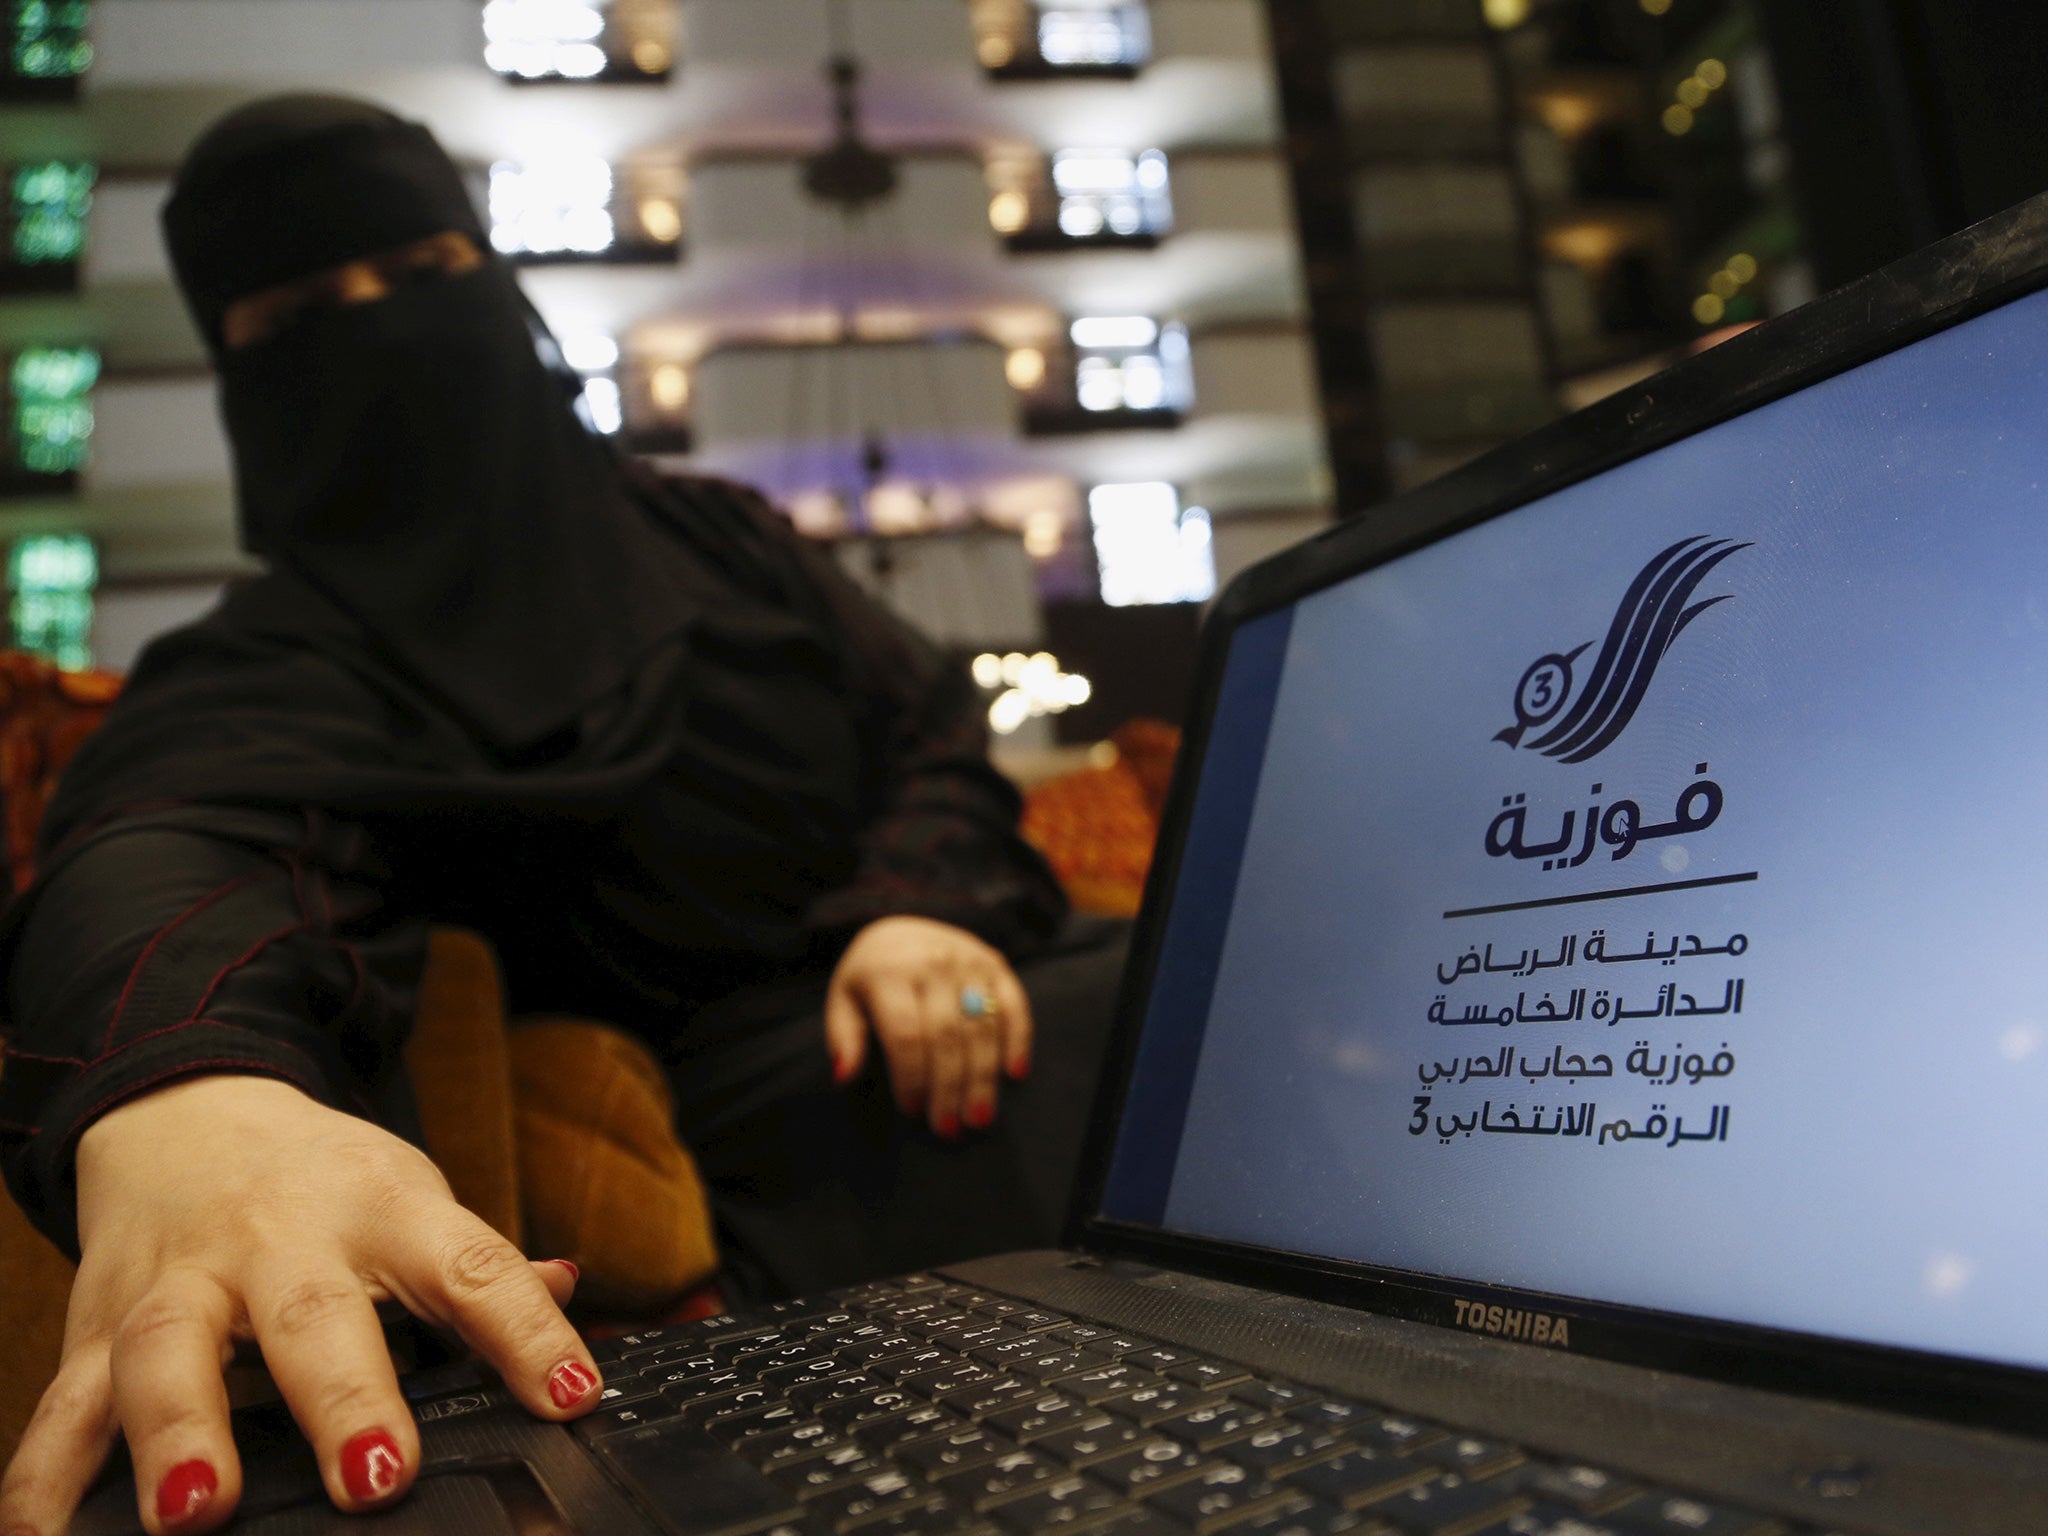 Saudi woman Fawzia al-Harbi, a candidate for local municipal council elections, shows her candidate biography at a shopping mall in Riyadh